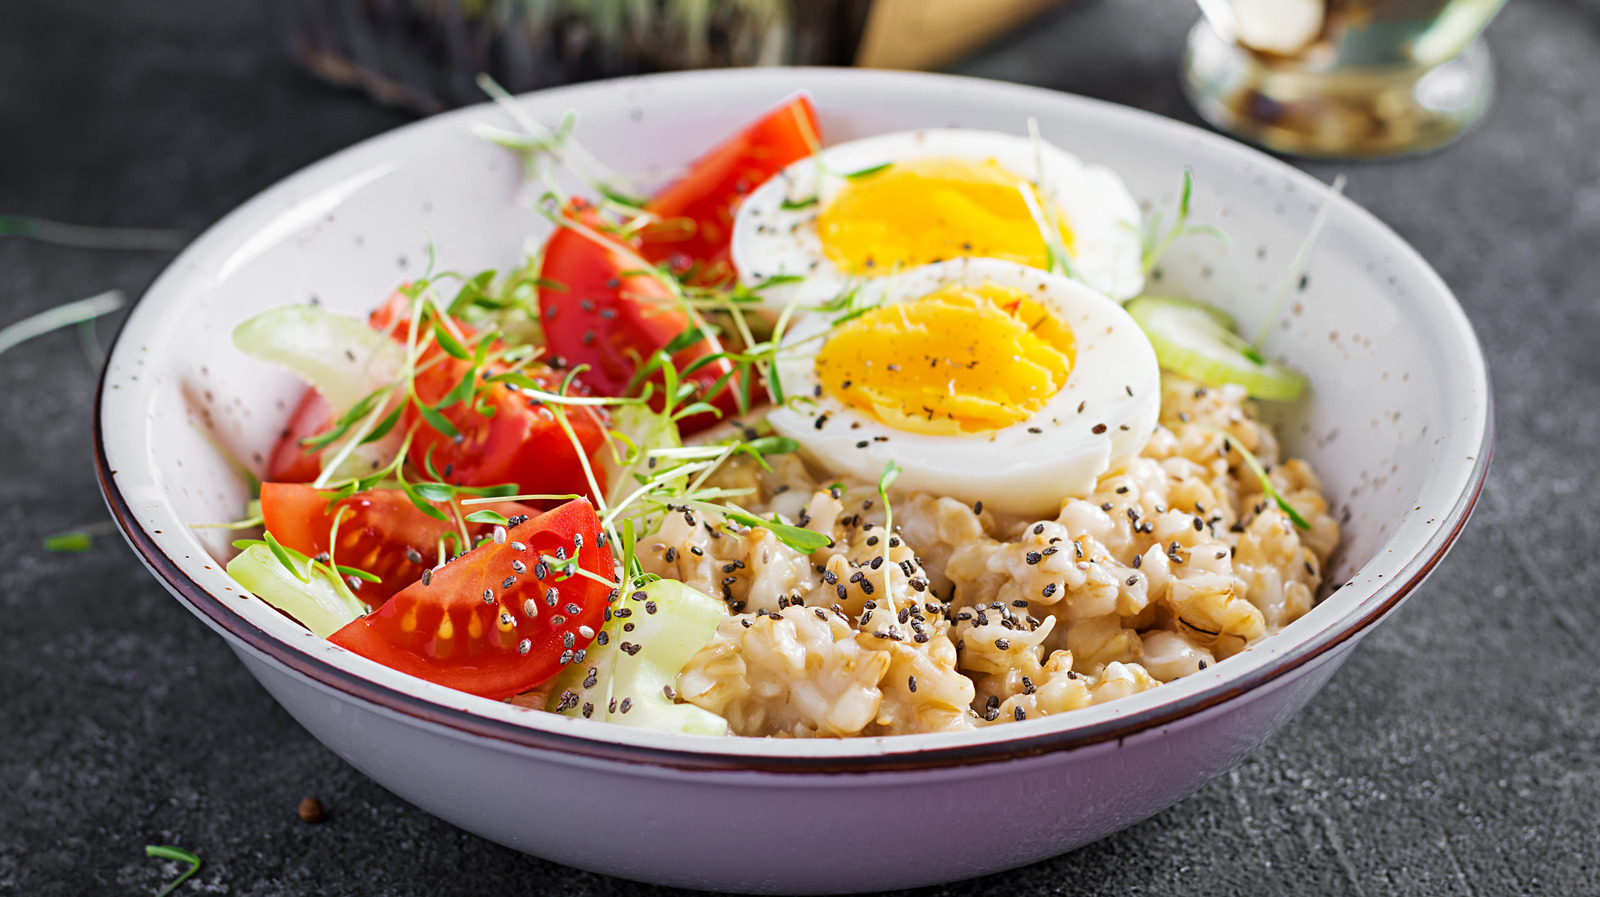 https://www.foodrepublic.com/img/gallery/bring-out-oatmeals-savory-power-with-hard-boiled-egg-slices/l-intro-1688996959.jpg